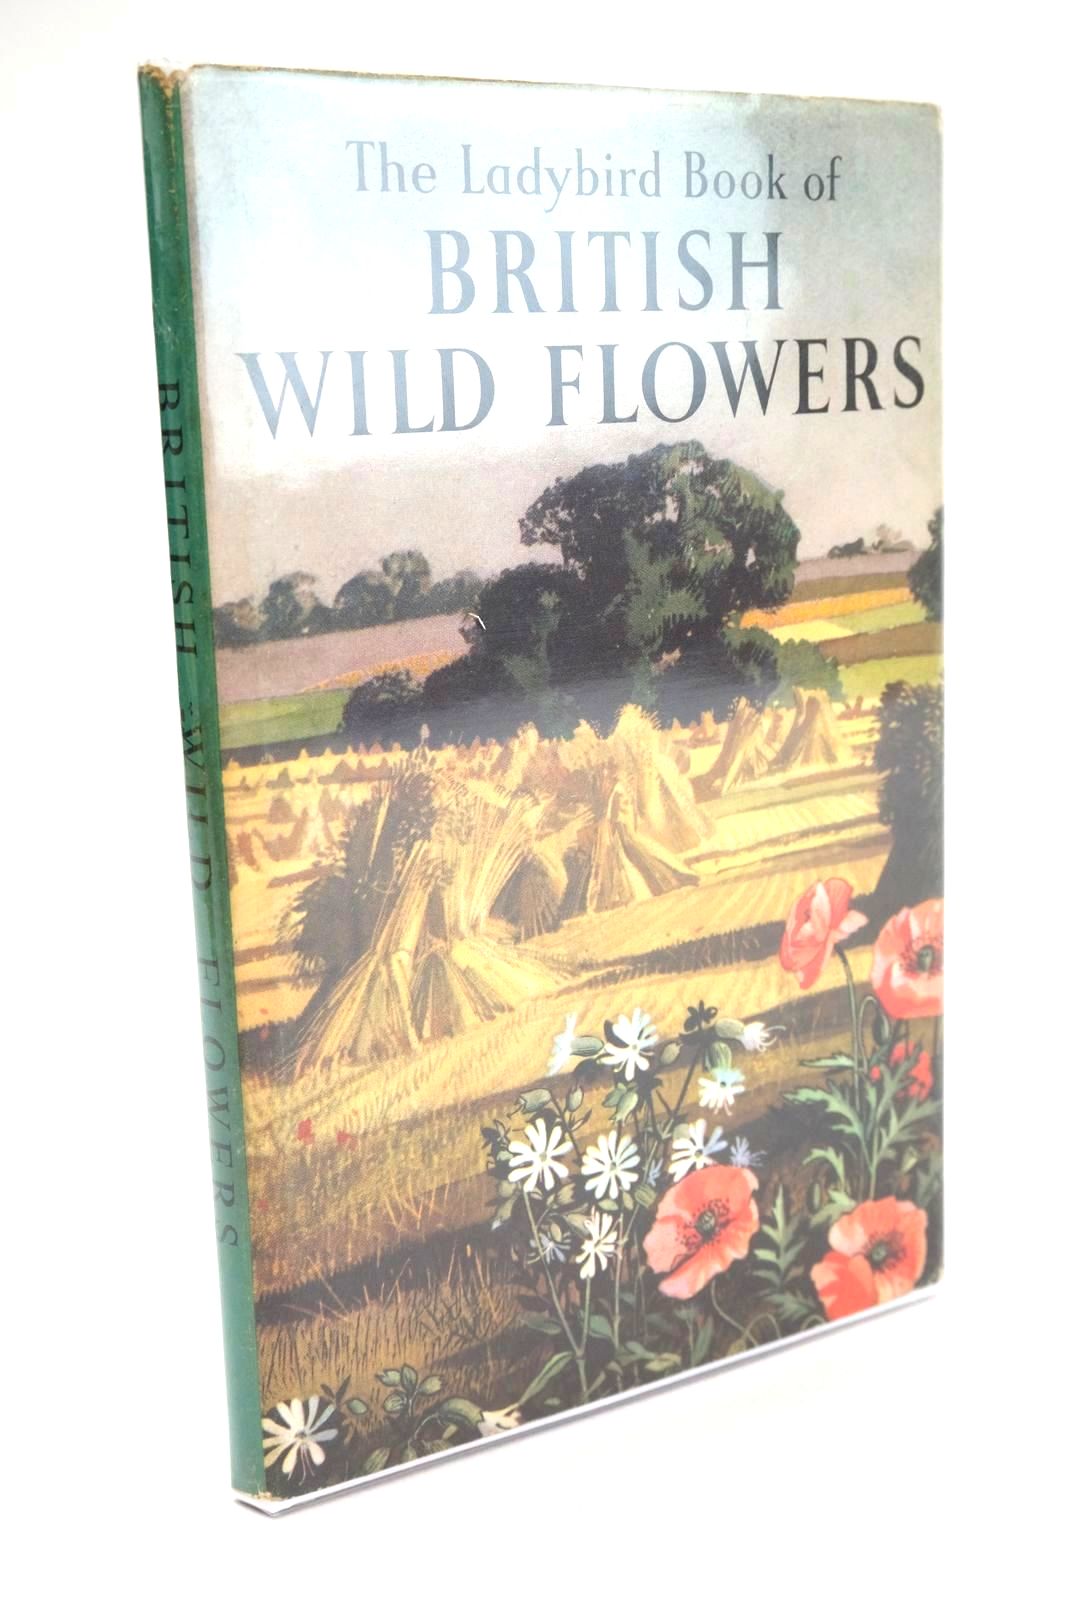 Photo of THE LADYBIRD BOOK OF BRITISH WILD FLOWERS written by Vesey-Fitzgerald, Brian illustrated by Hilder, Rowland Hilder, Edith published by Wills &amp; Hepworth Ltd. (STOCK CODE: 1324990)  for sale by Stella & Rose's Books